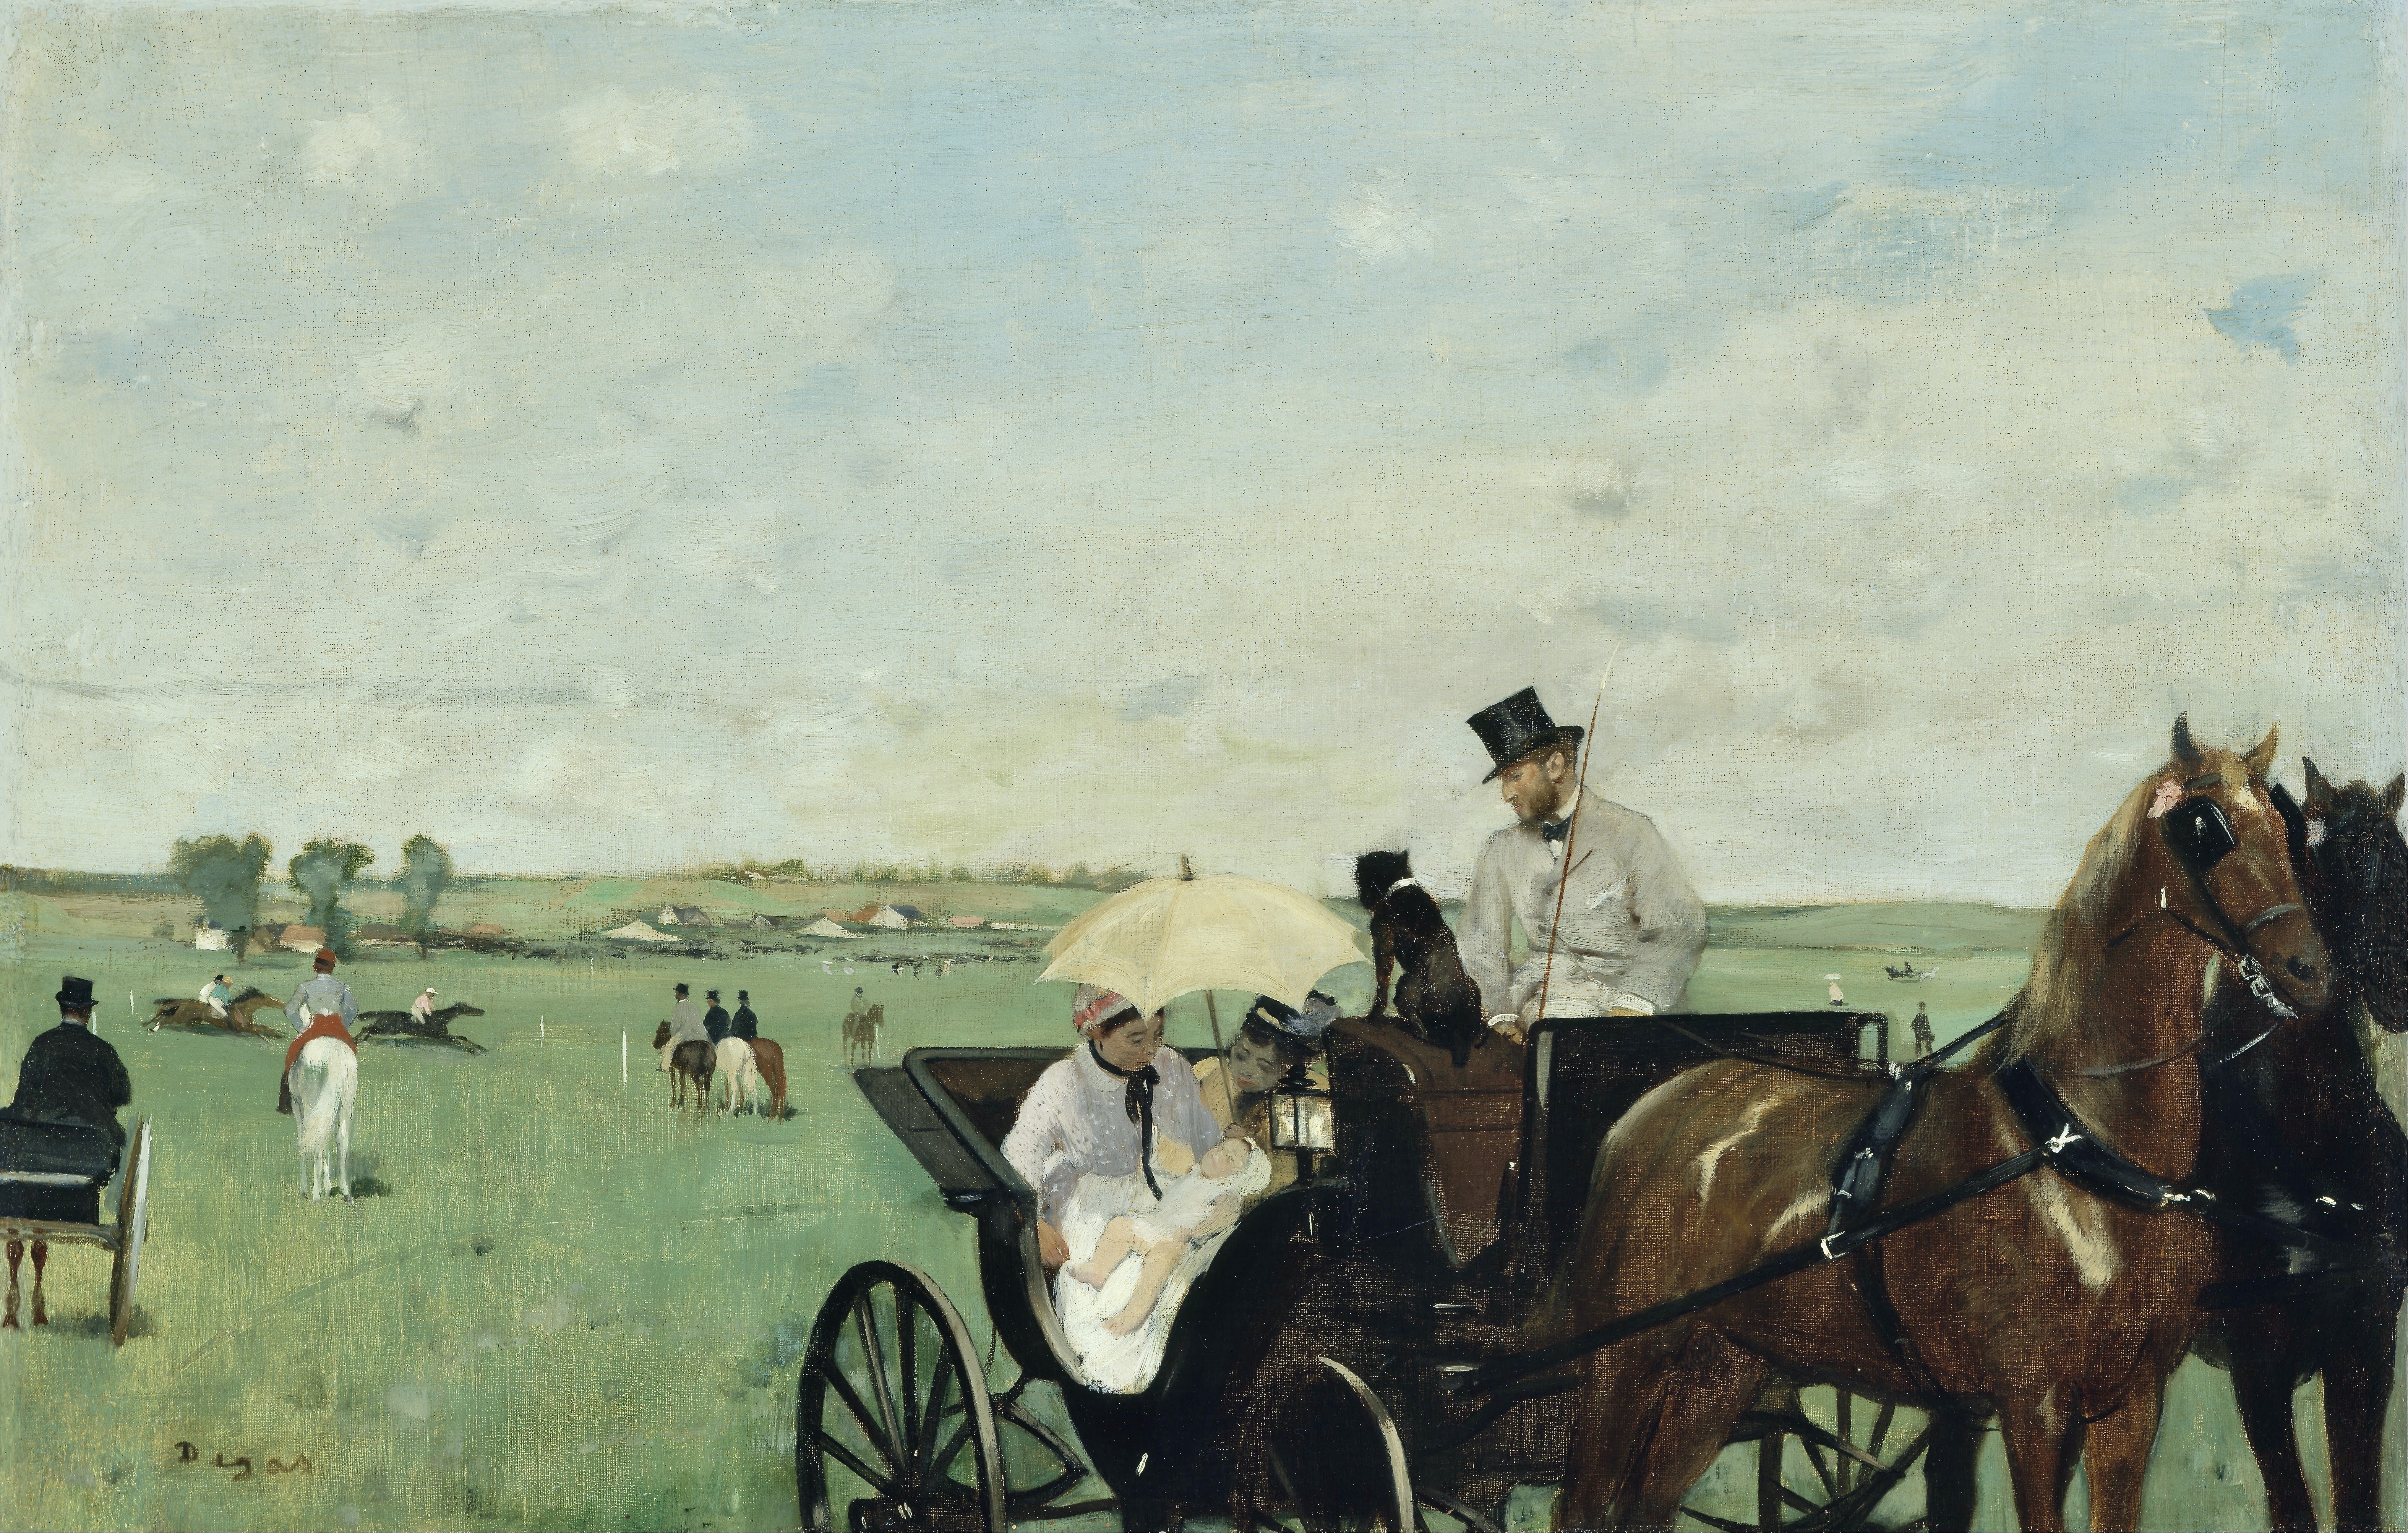 Edgar_Degas_-_At_the_Races_in_the_Countryside_-_Google_Art_Project